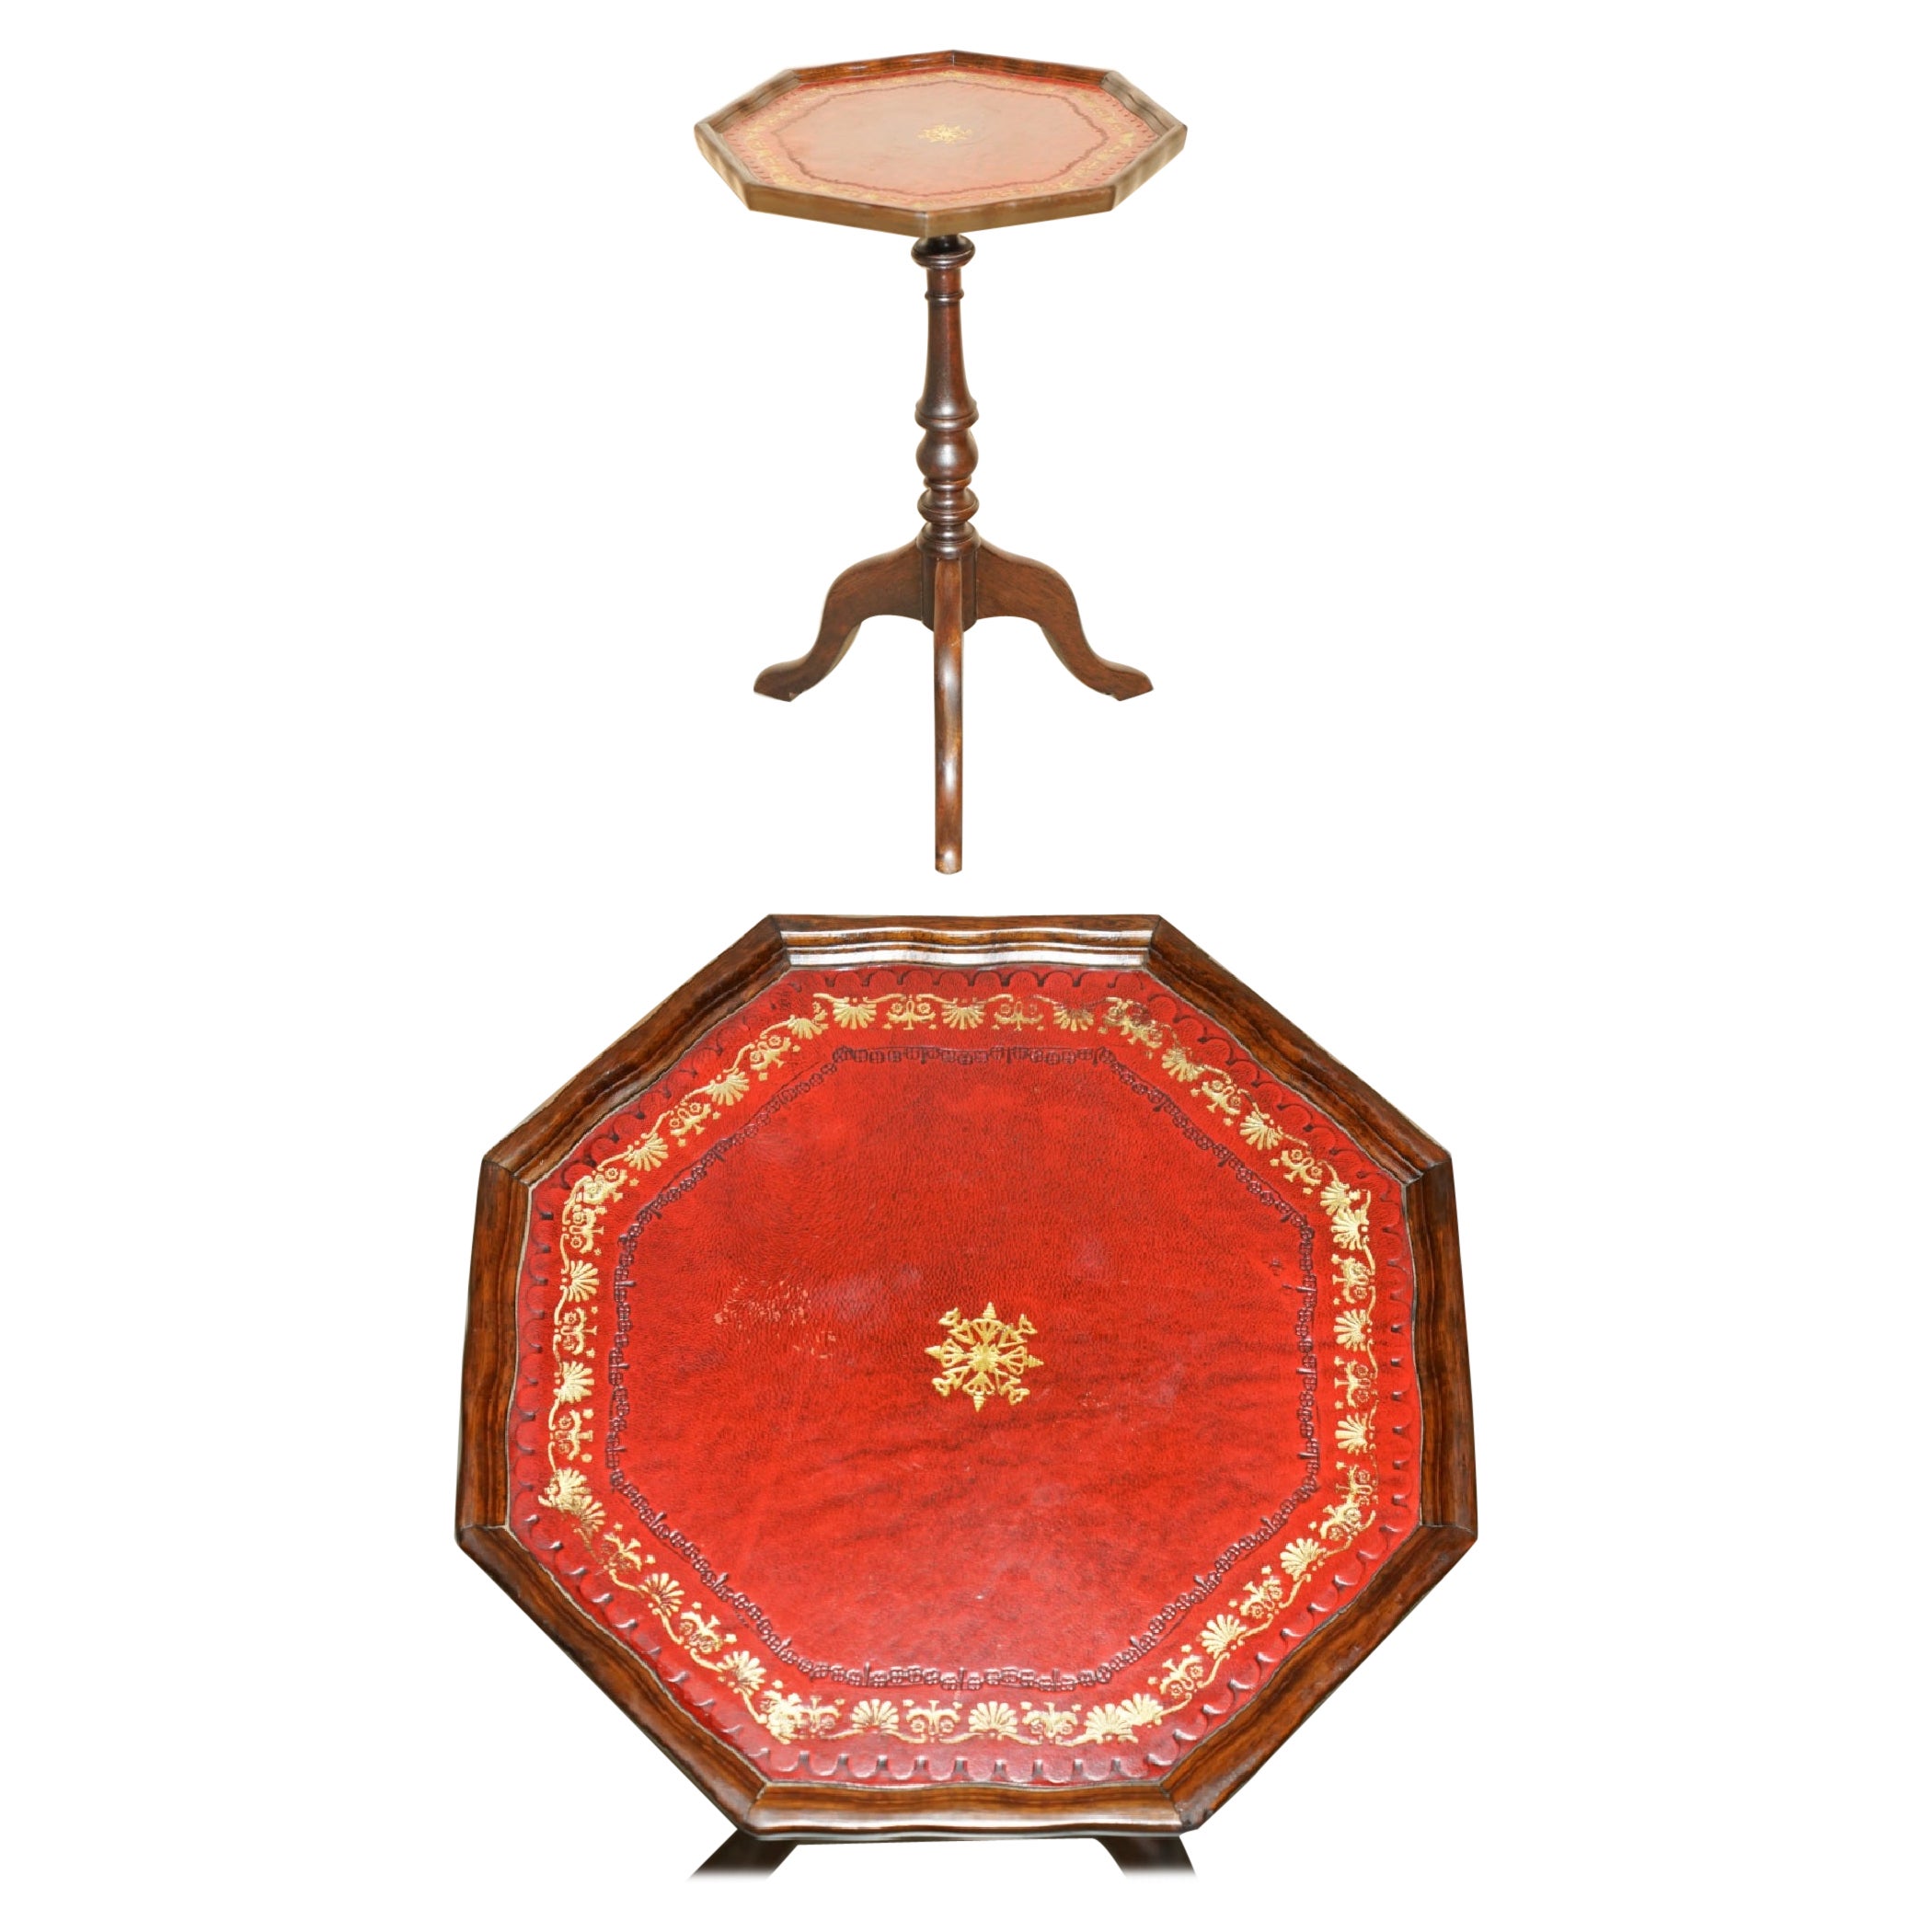 LOVELY GOLD LEAF EMBOSSED OXBLOOD LEATHER TRIPOD SiDE END LAMP WINE TABLE